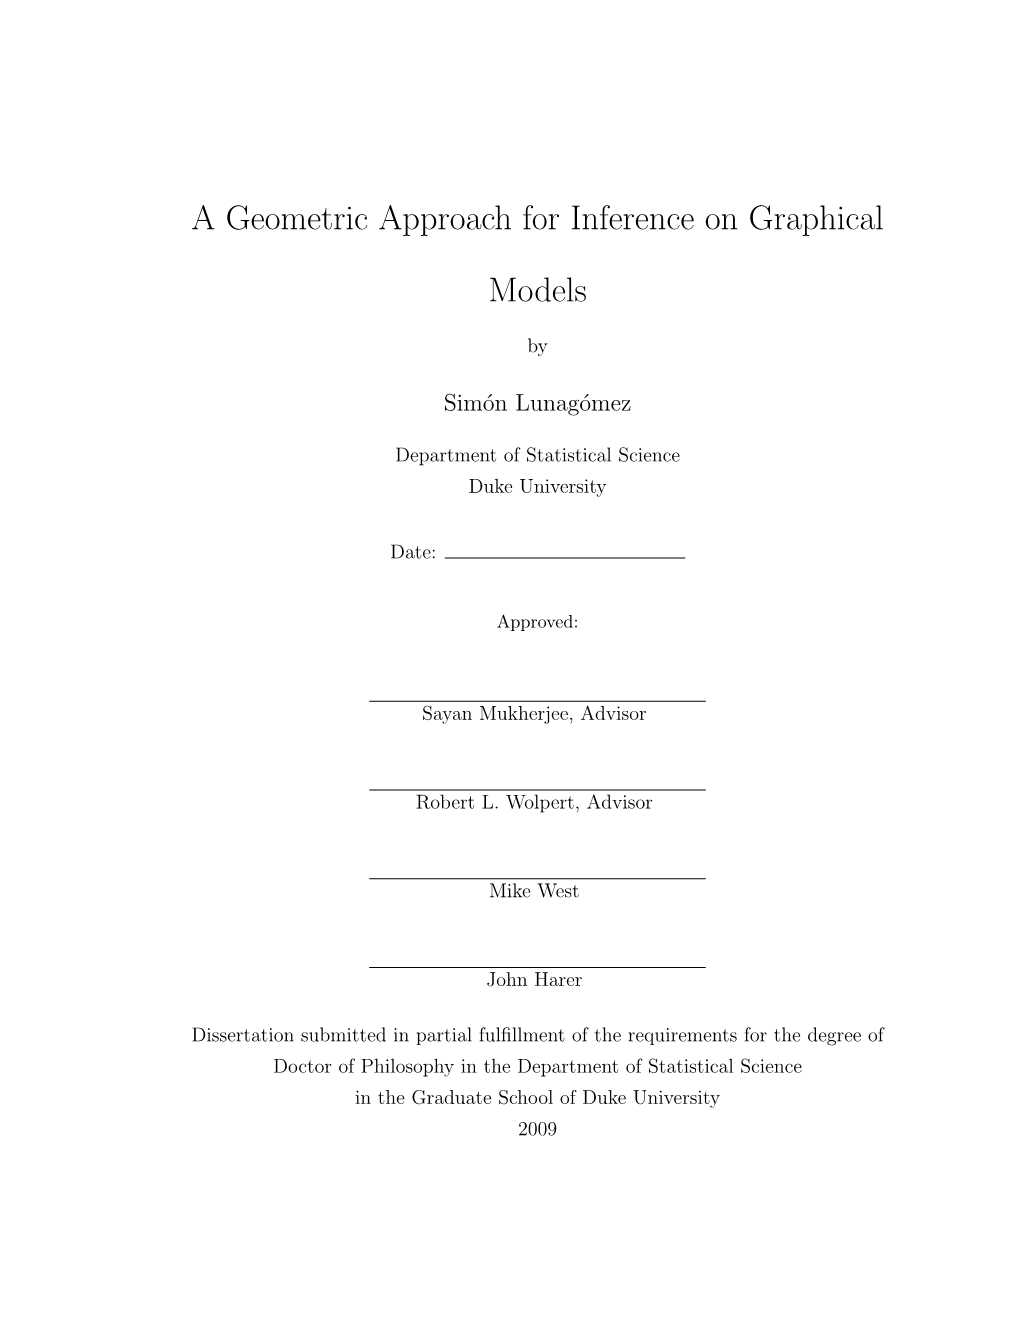 A Geometric Approach for Inference on Graphical Models